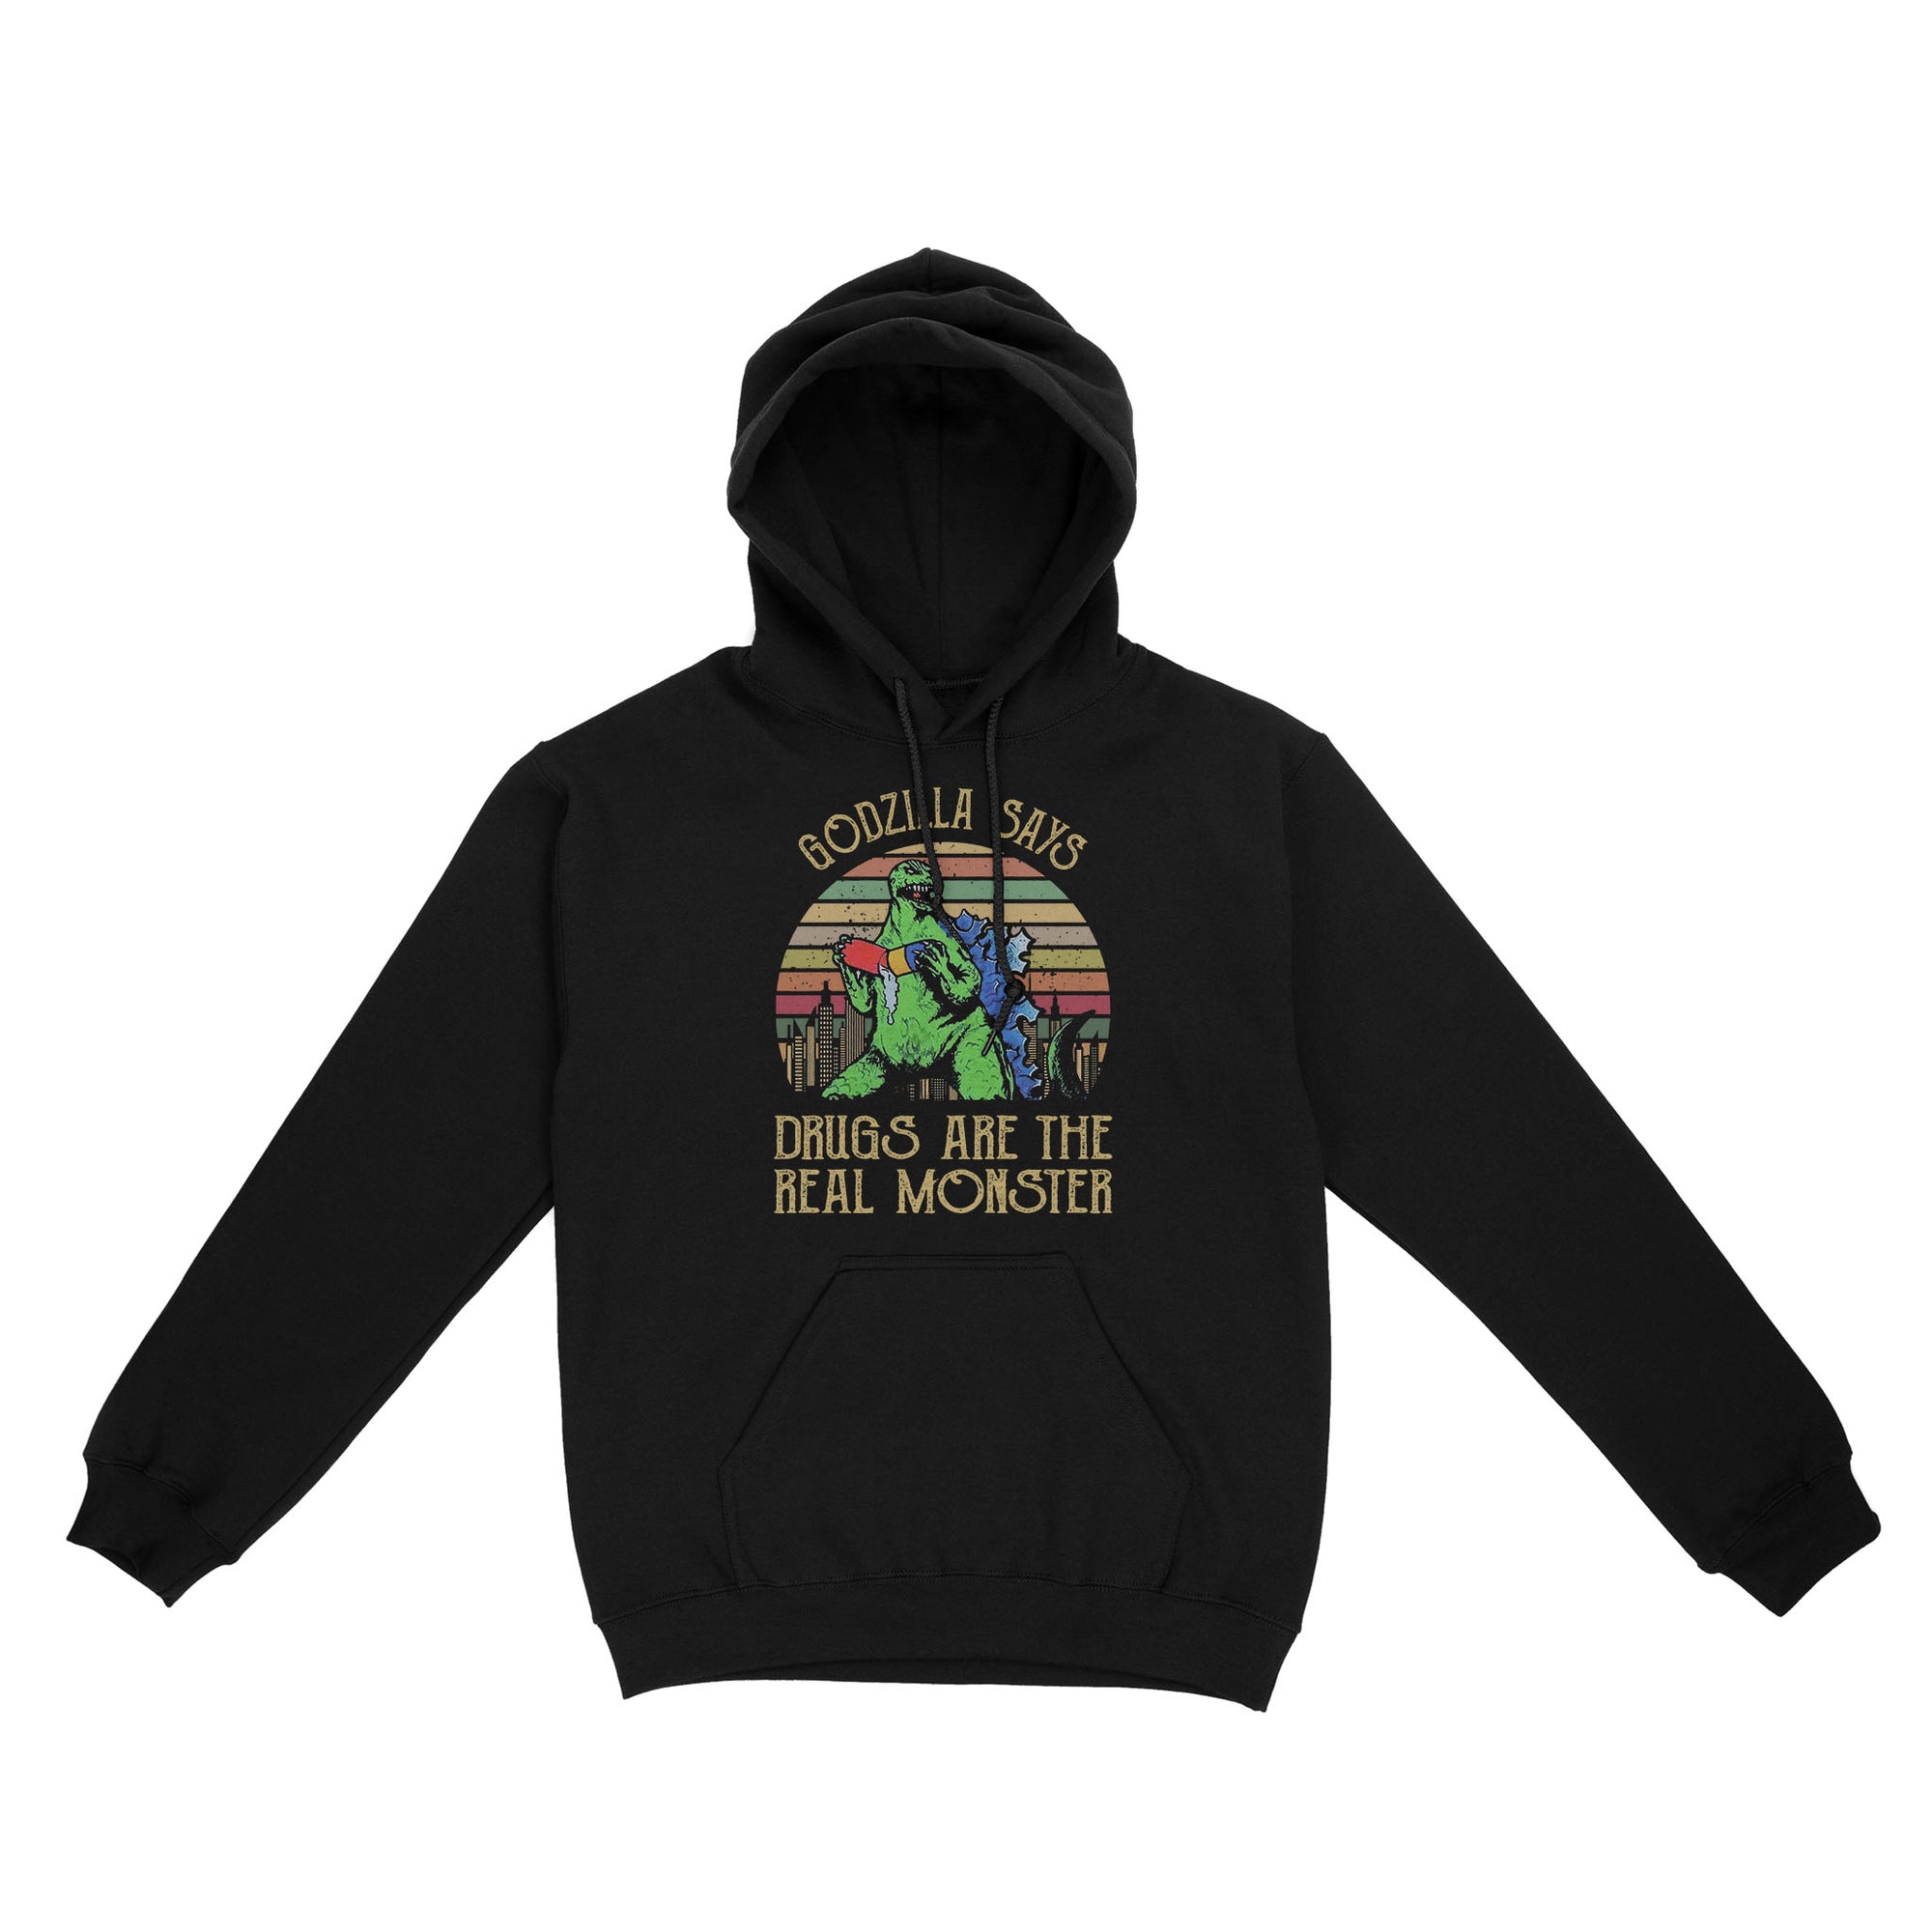 Godzilla says drugs are the real monster Standard Hoodie